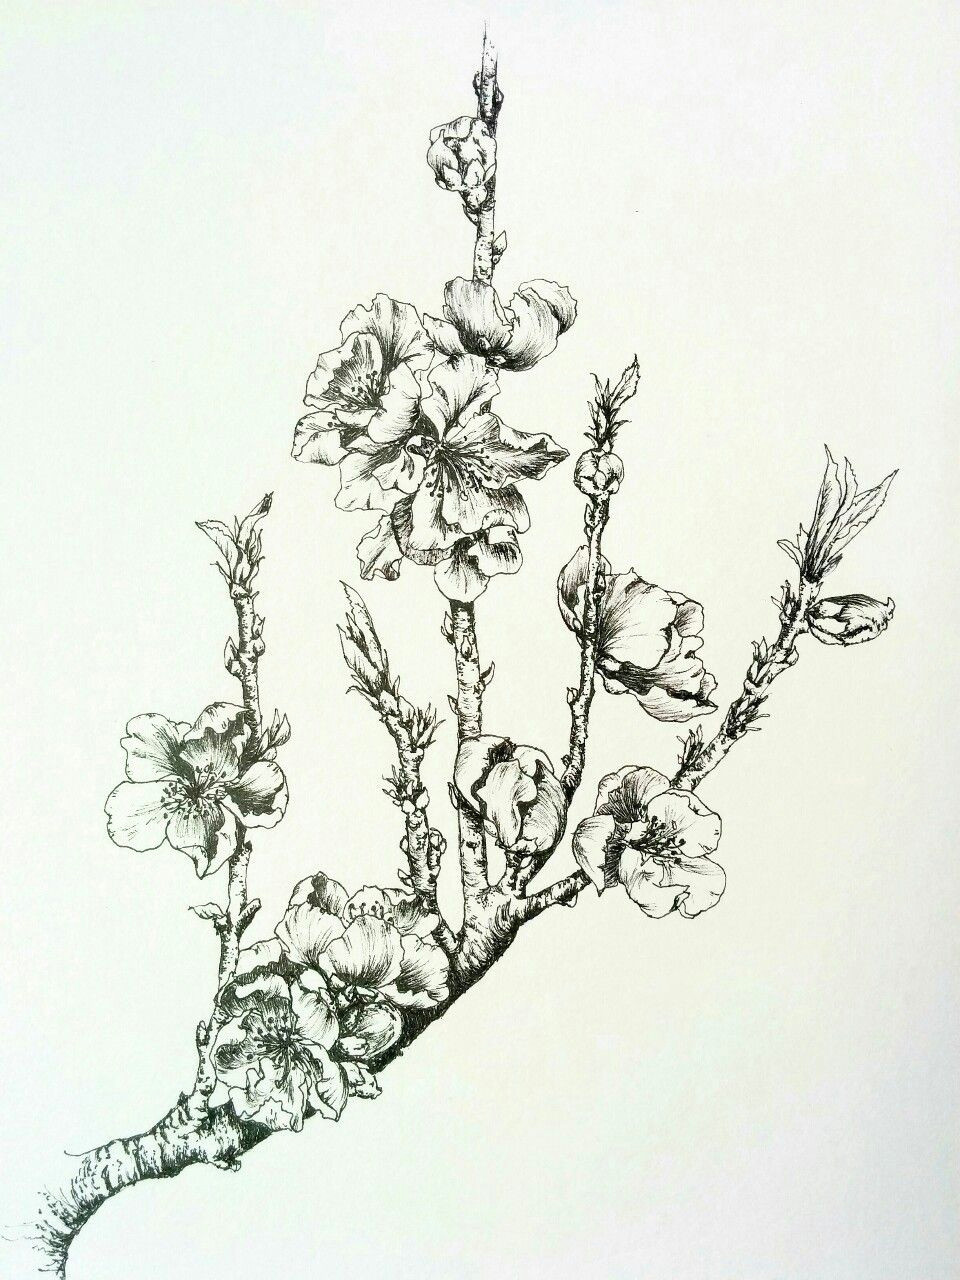 Drawings Of Flower Buds Nectarine Blossoms Lots Of Flower Buds at the Moment Hoping for A